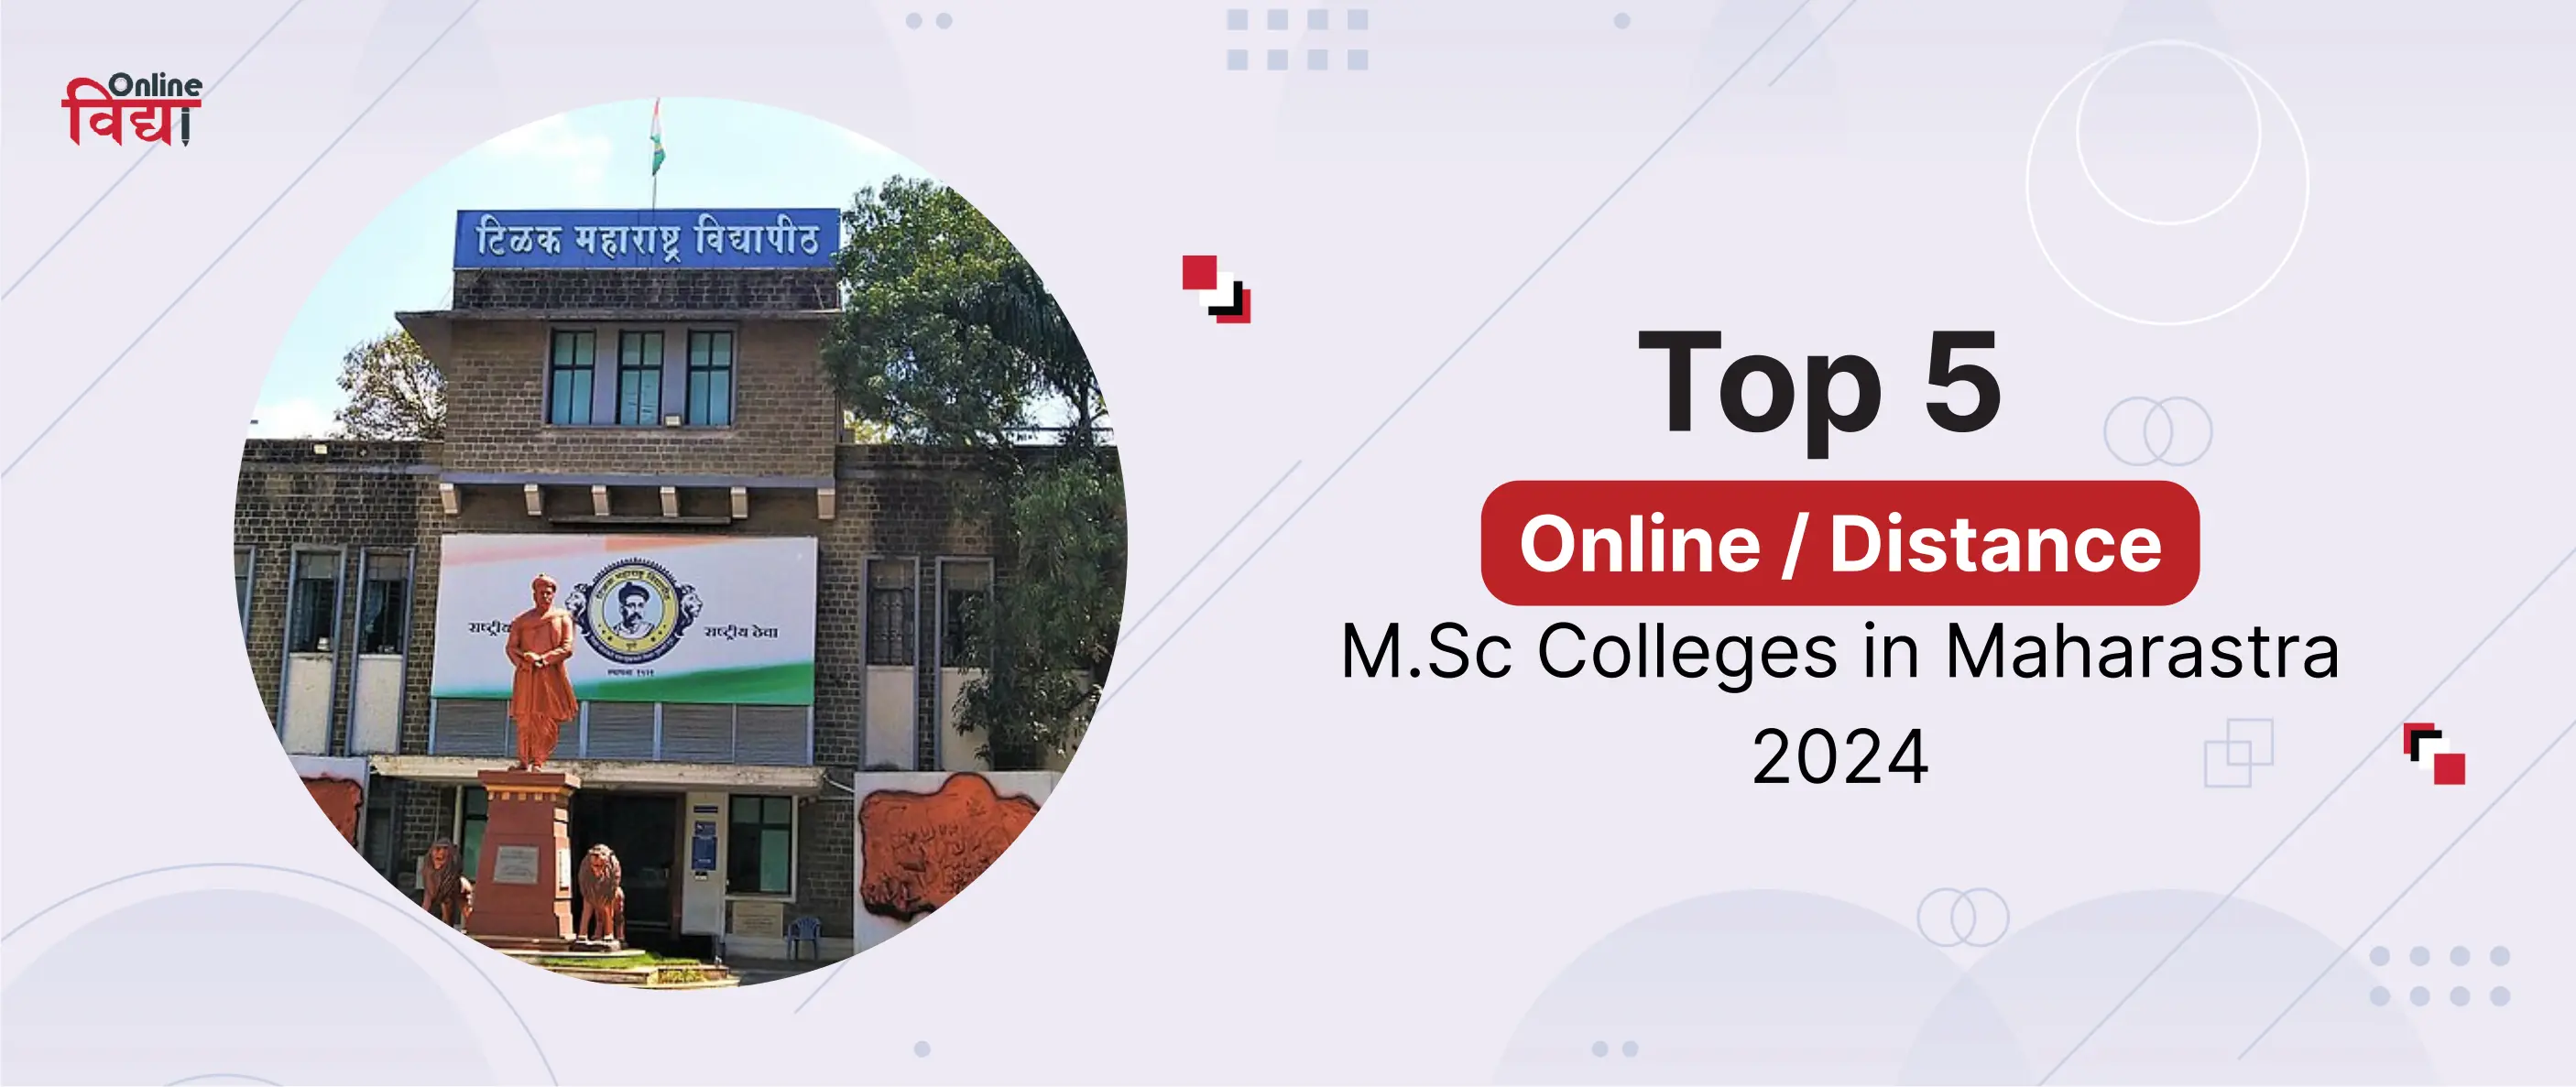 Top 5 Online/Distance M.Sc Colleges in Maharastra 2024